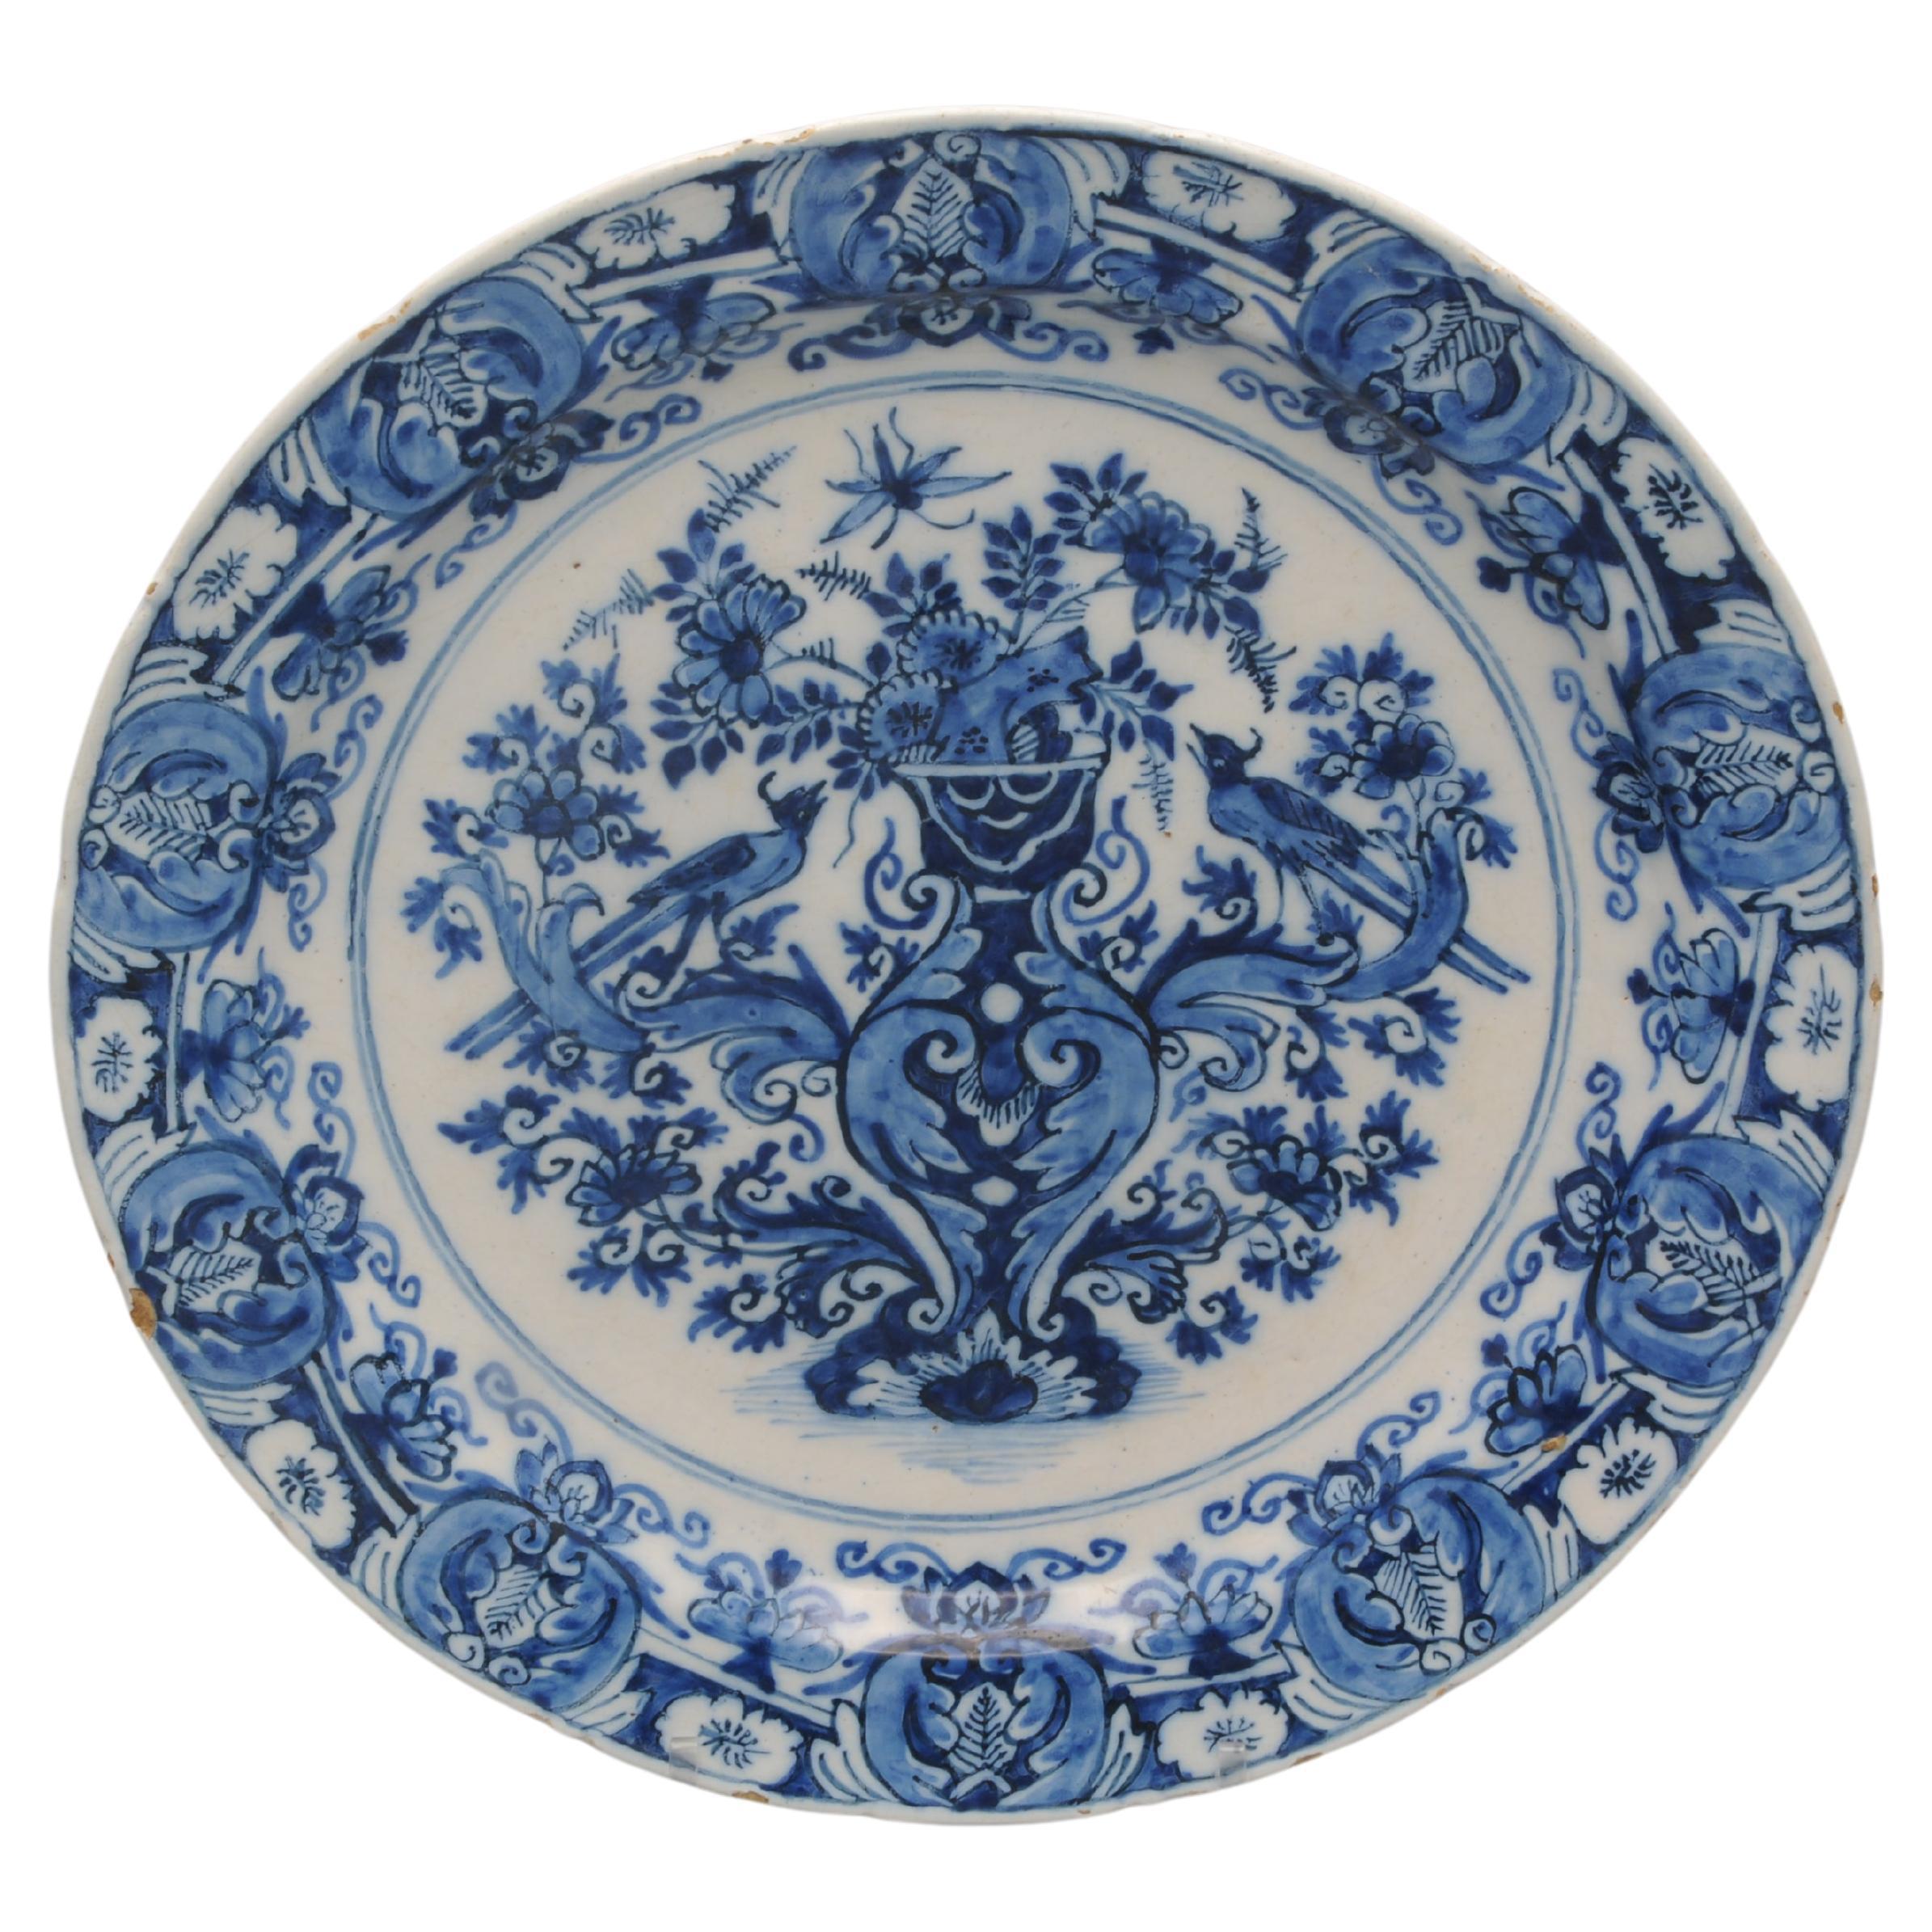 Delft - Louis XIV style plate, first half 18th century